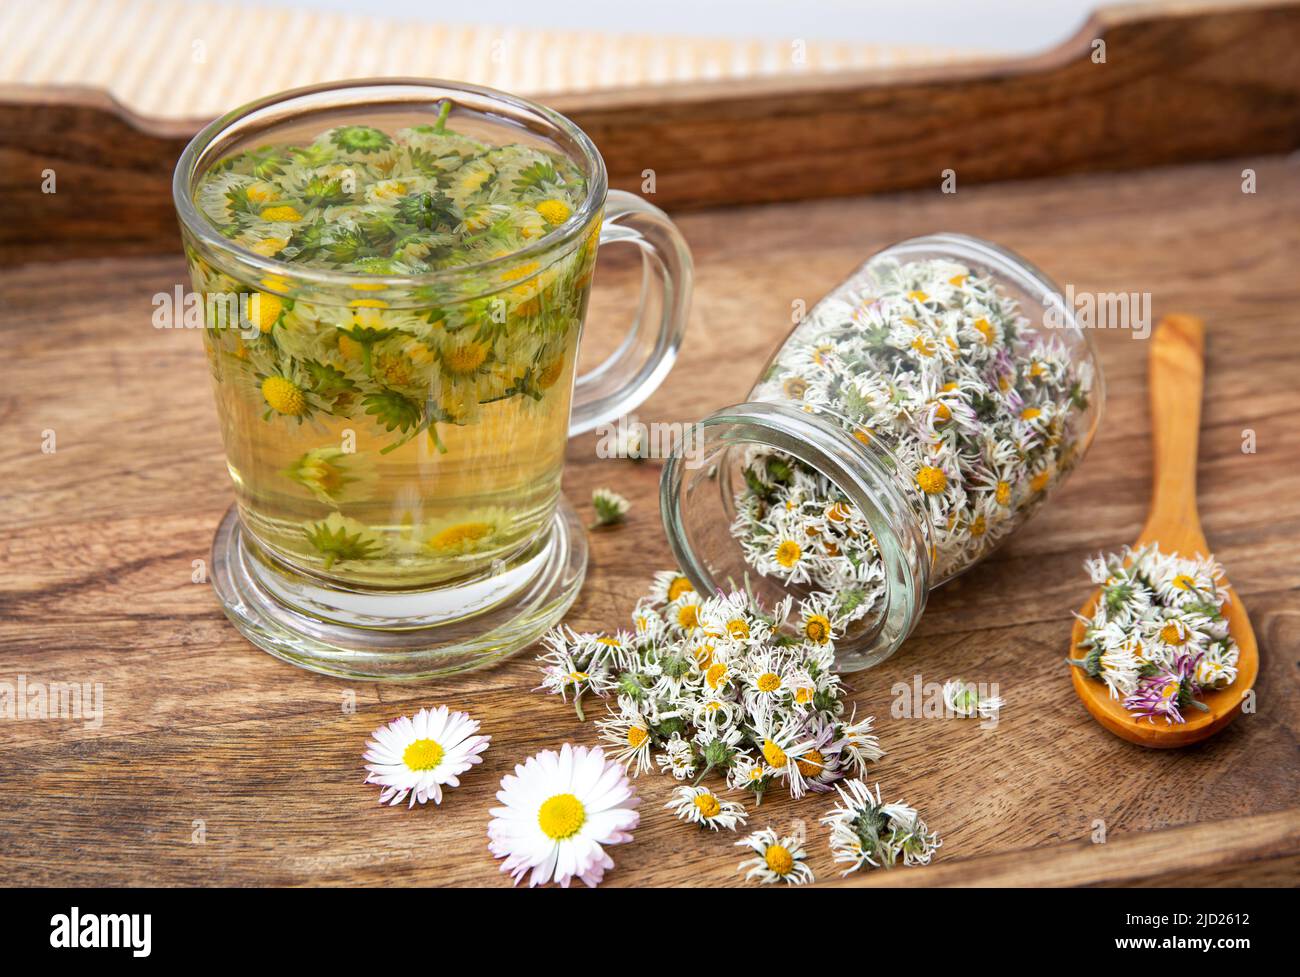 Dried herbal medicinal plant Common Daisy, also known as Bellis Perennis. Dry flower blossoms in glass jar and and herbal tea in glass, indoors still Stock Photo